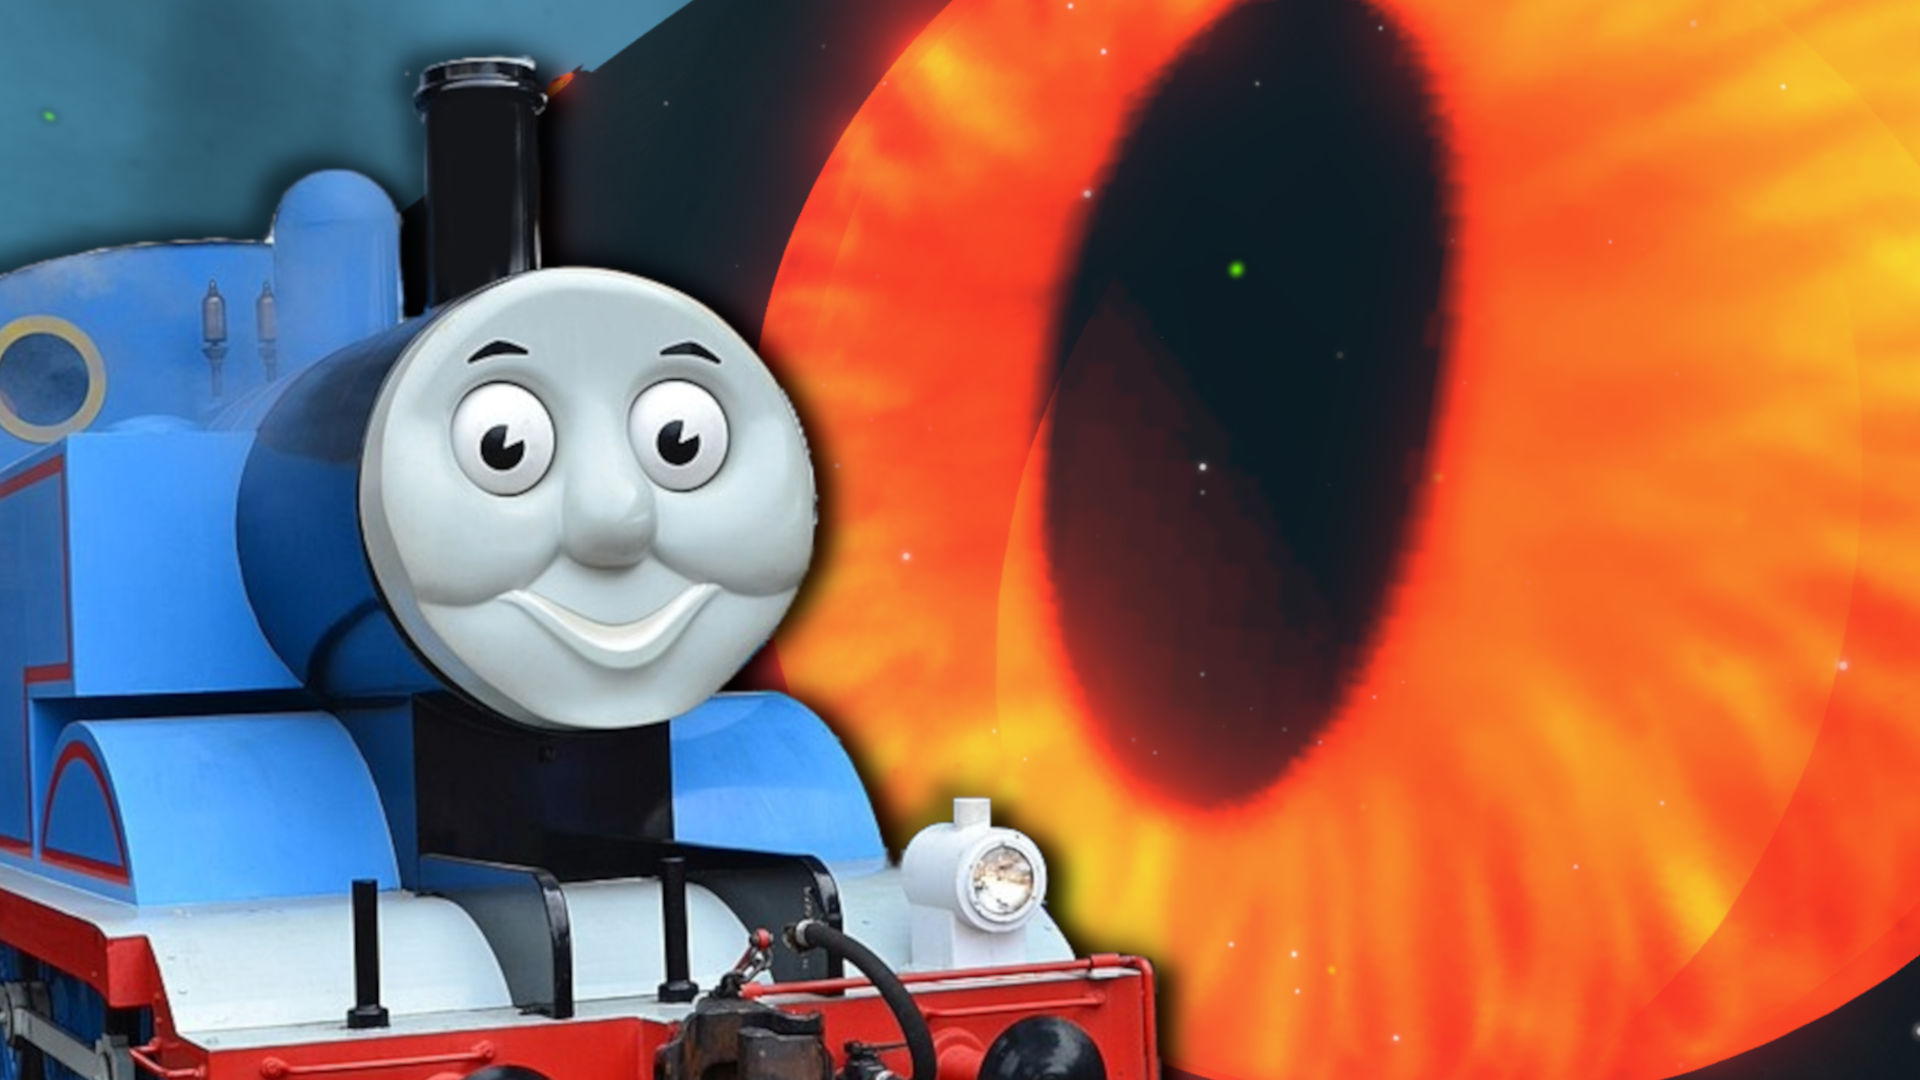 Skyrim's Thomas the Tank Engine modder has his own RPG on the way